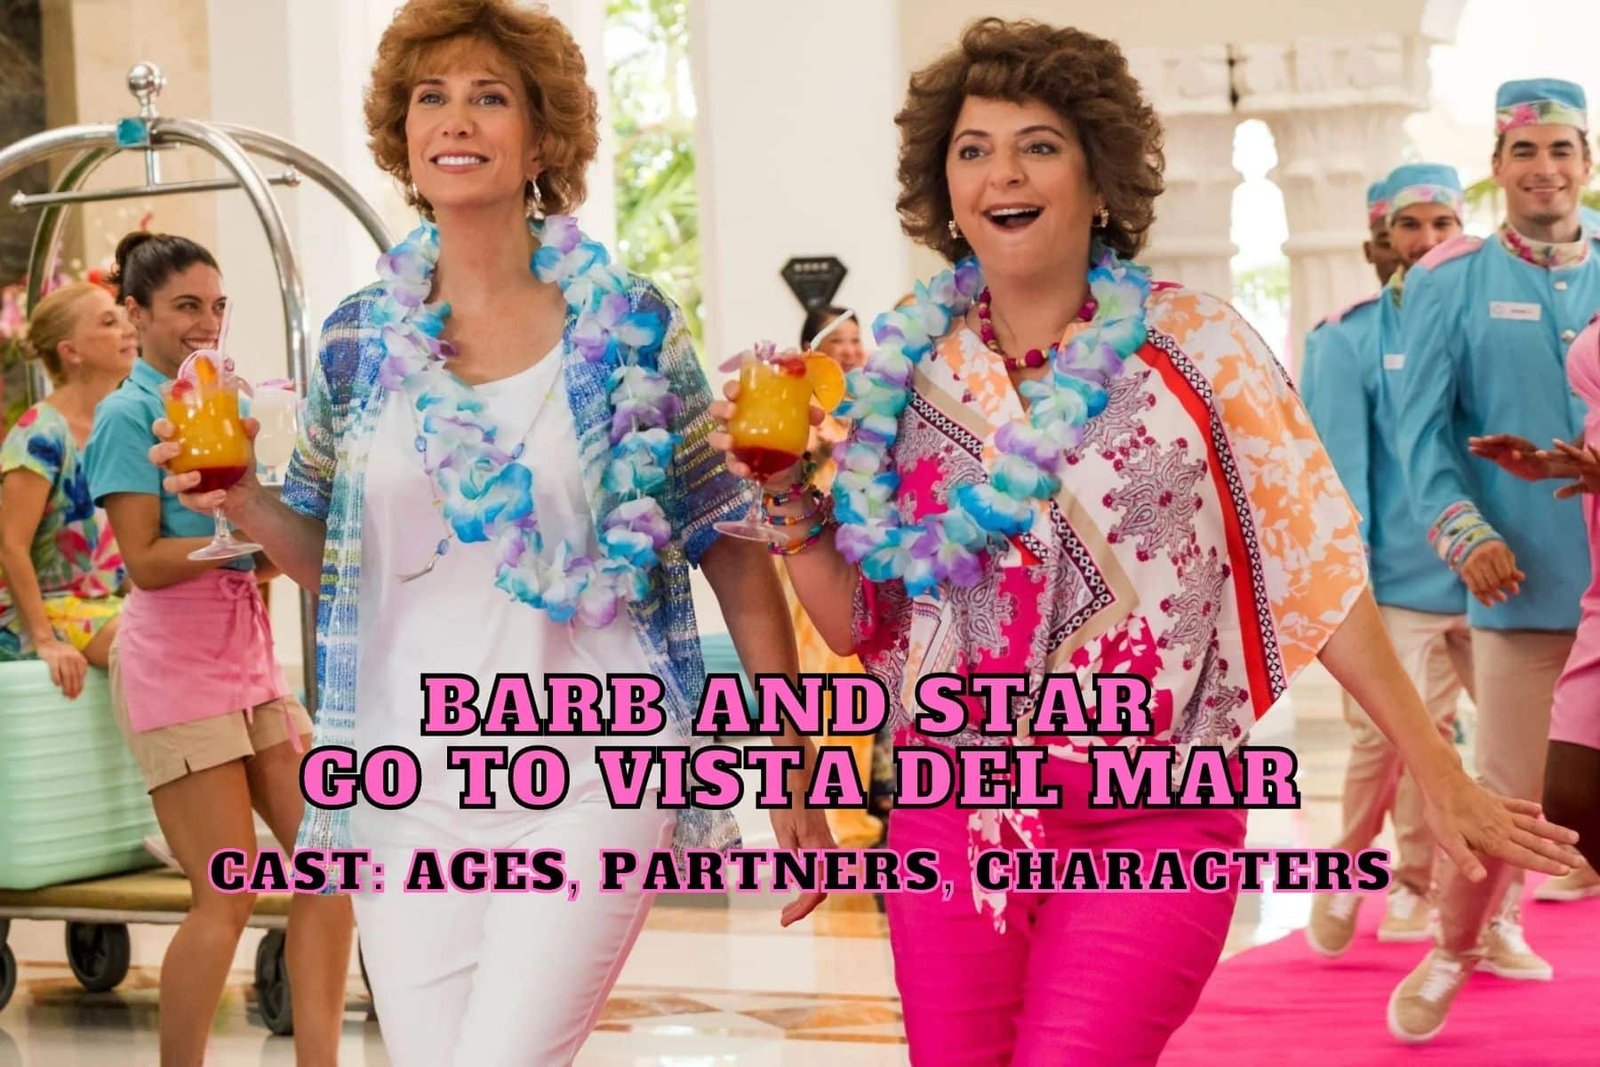 Barb and Star Cast - Ages, Partners, Characters